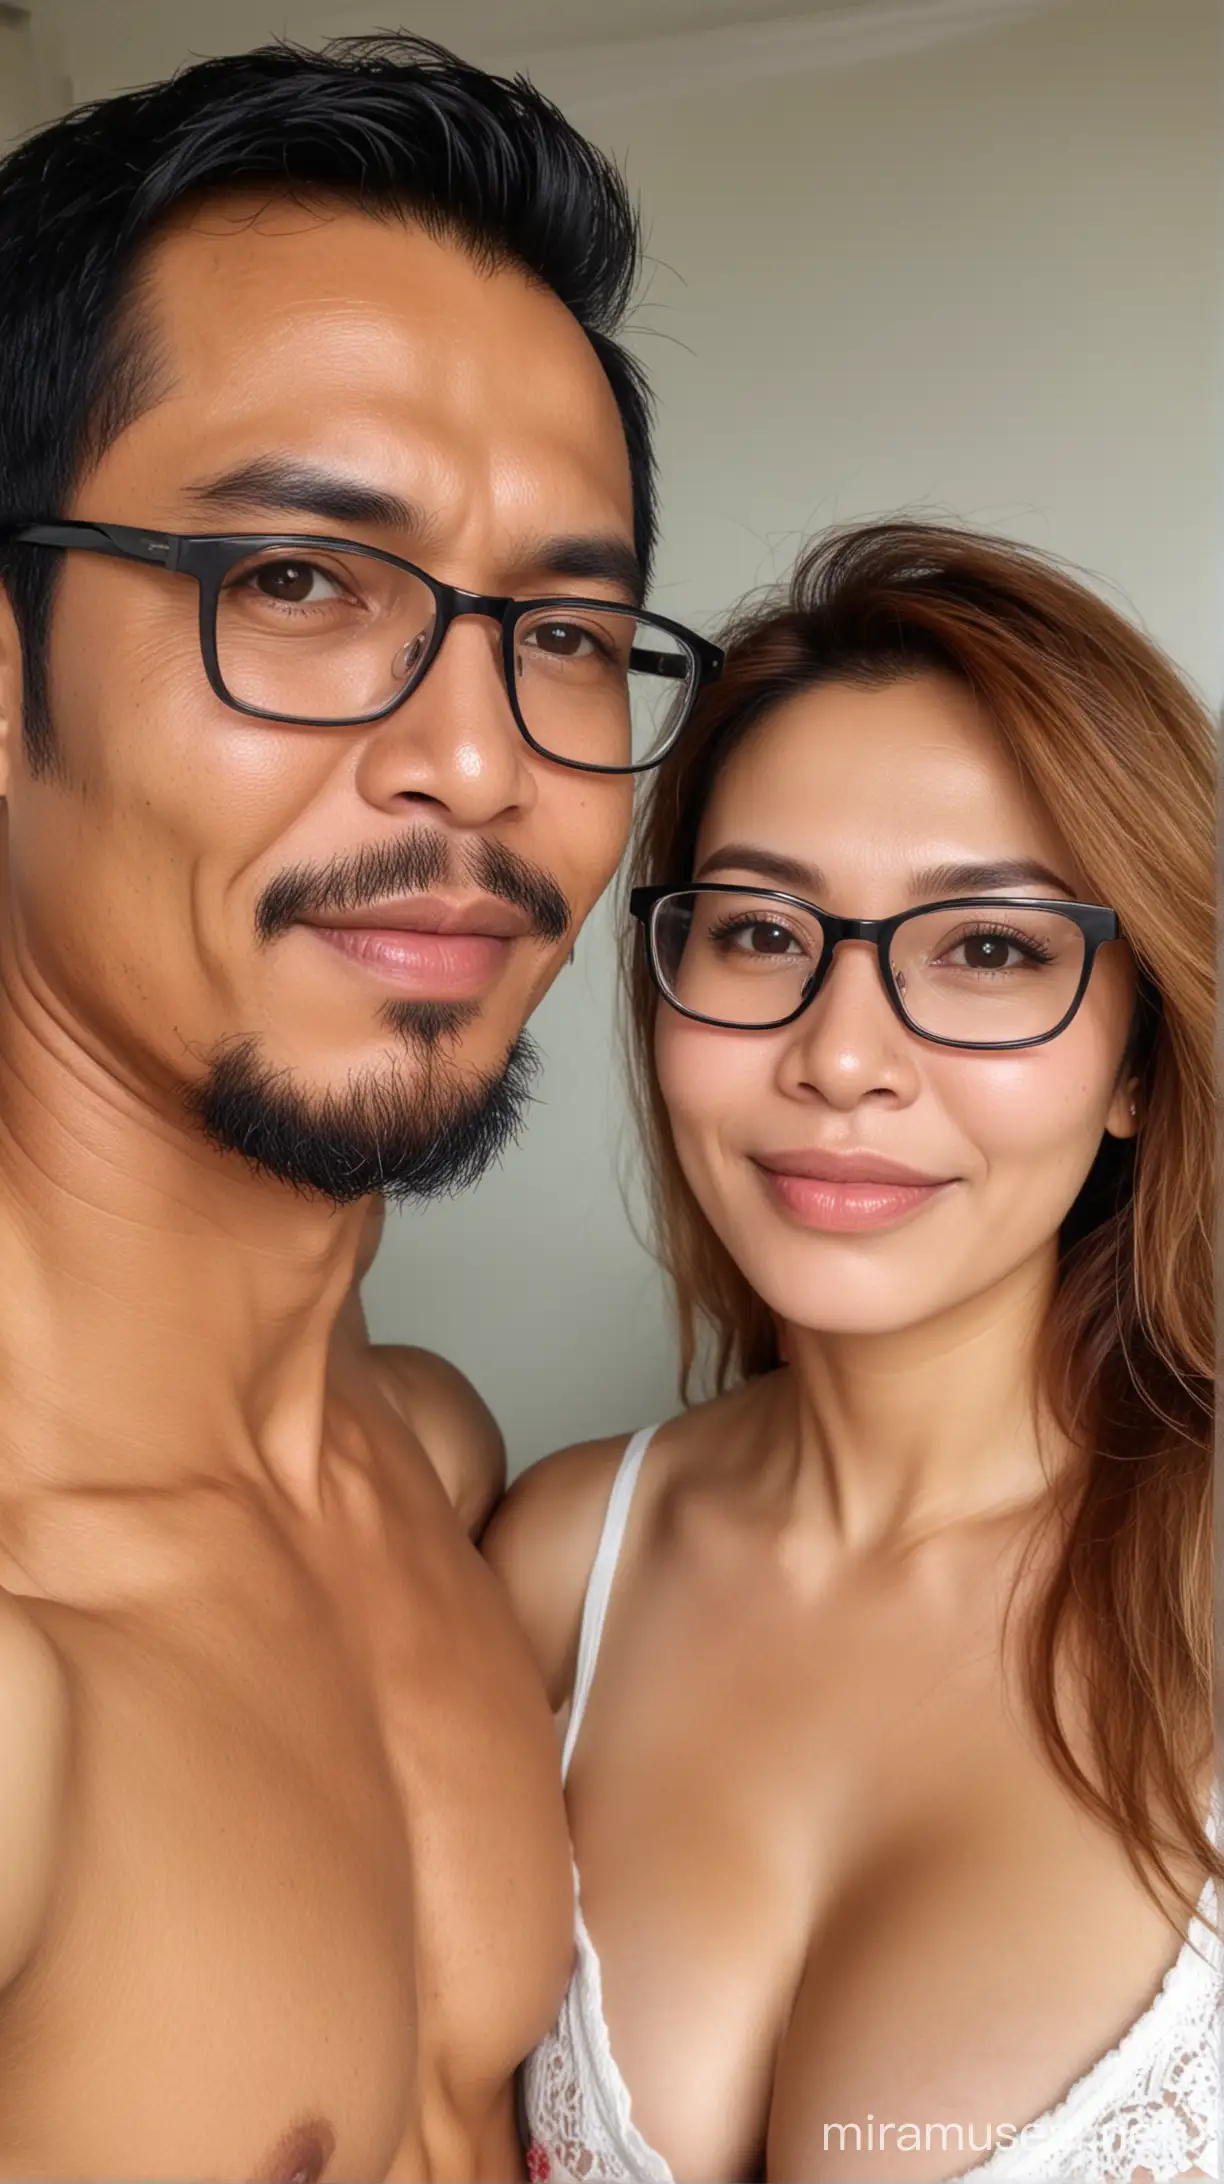 Affectionate Indonesian Couple Embracing Husband with Glasses Hugging His Beautiful Wife